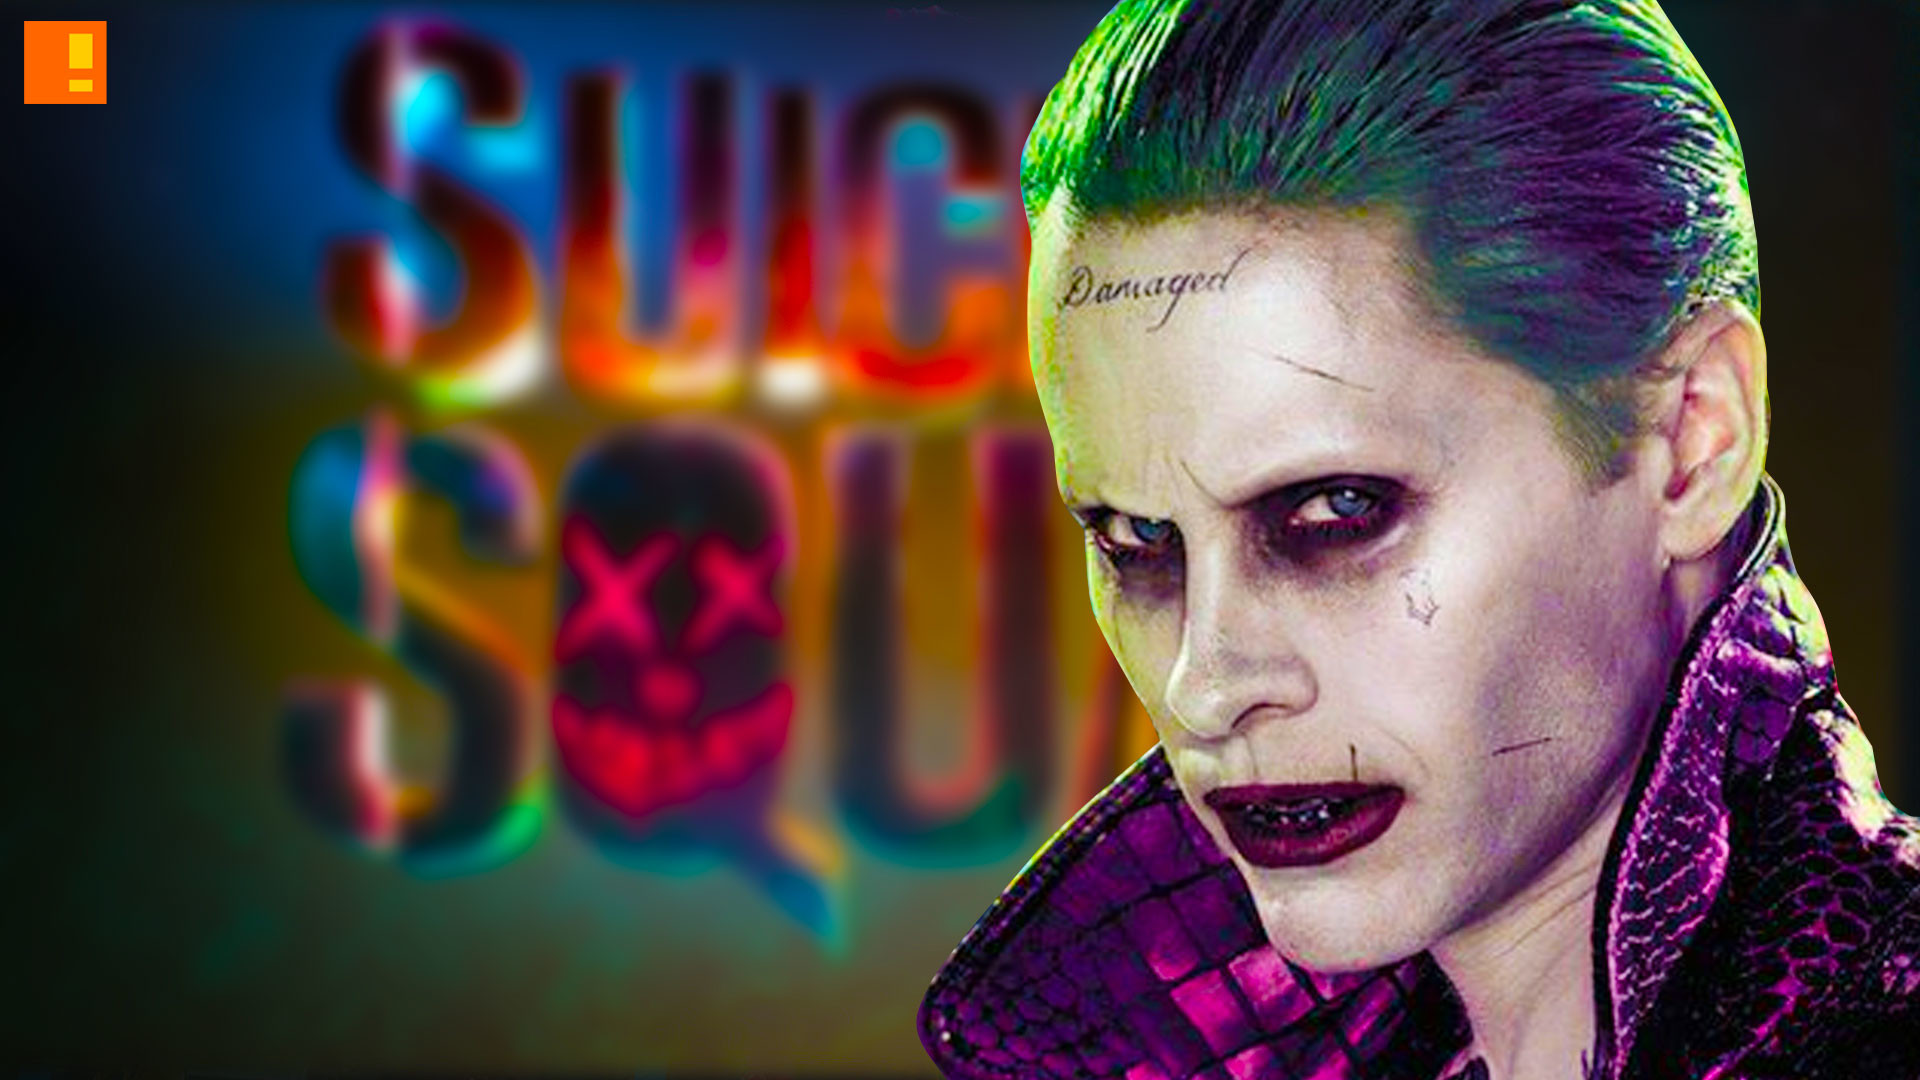 Suicide squad, joker, banner, poster, entertainment on tap, the action pixel